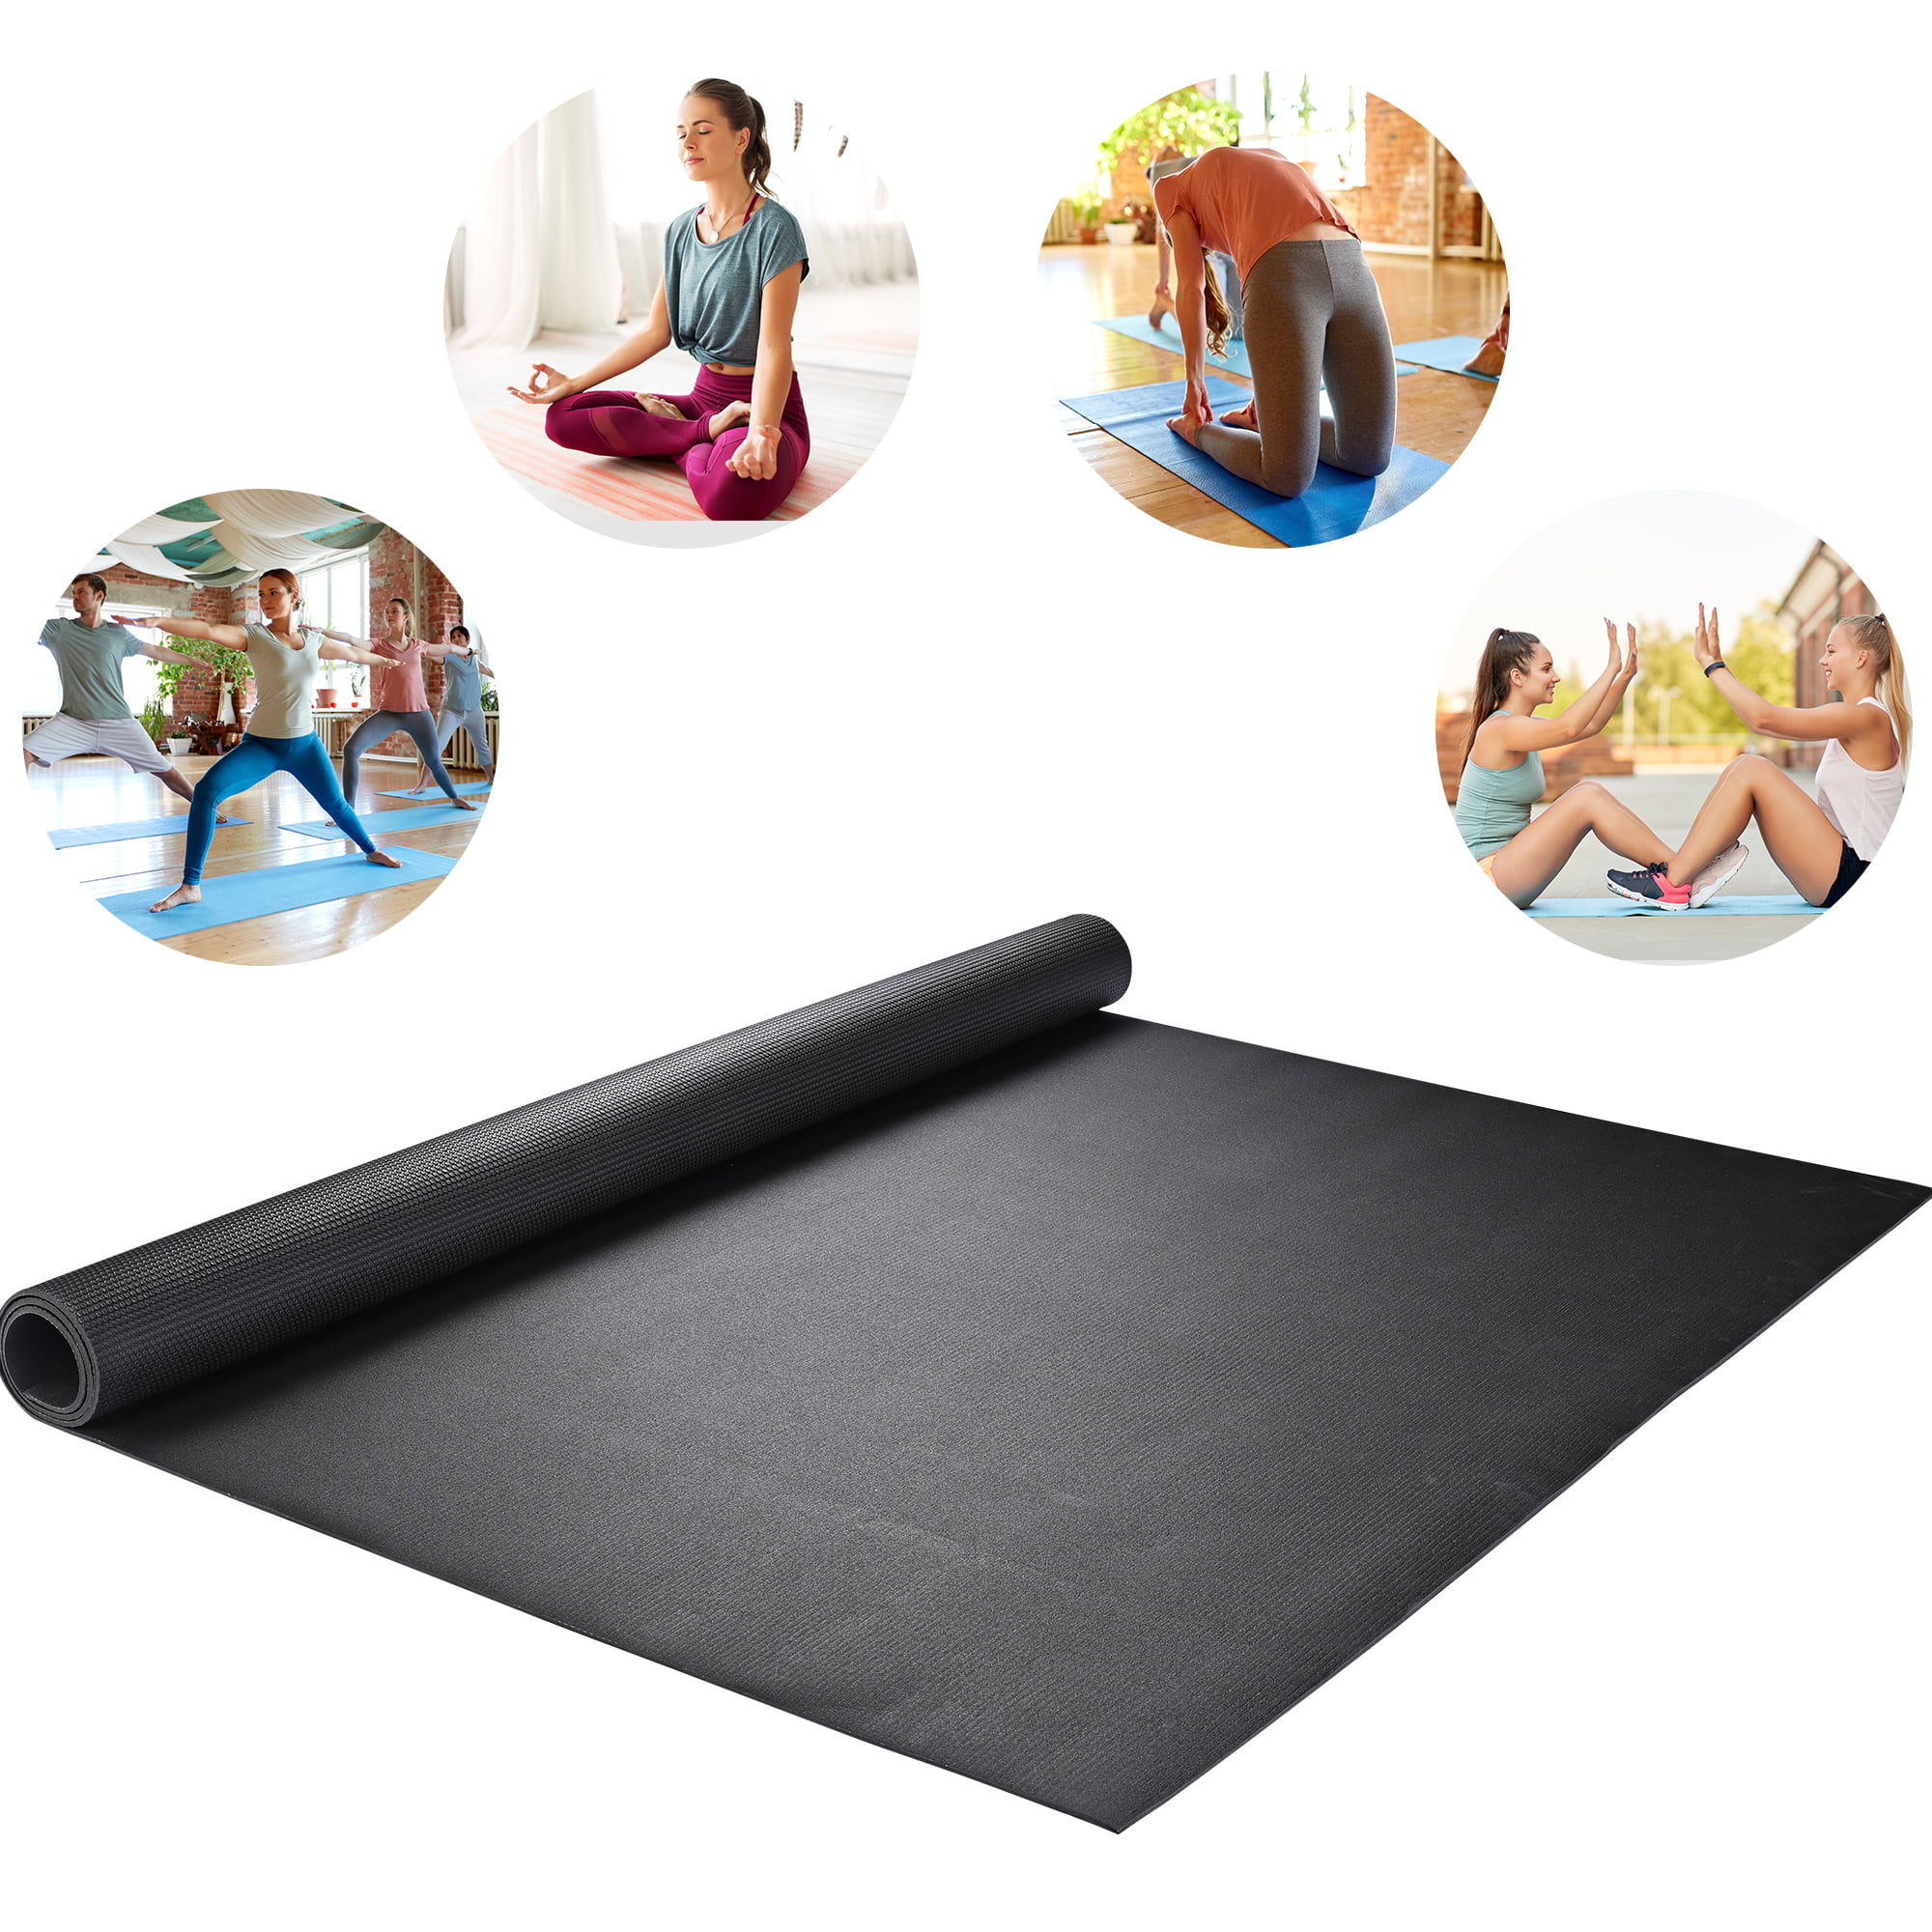 Large Yoga Mat - 6' x 4' x 9mm Extra Thick Exercise Mat for Yoga, Pilates,  Stretching, Cardio Home Gym Floor, Non- Slip Anti Tear Eco-Friendly Workout